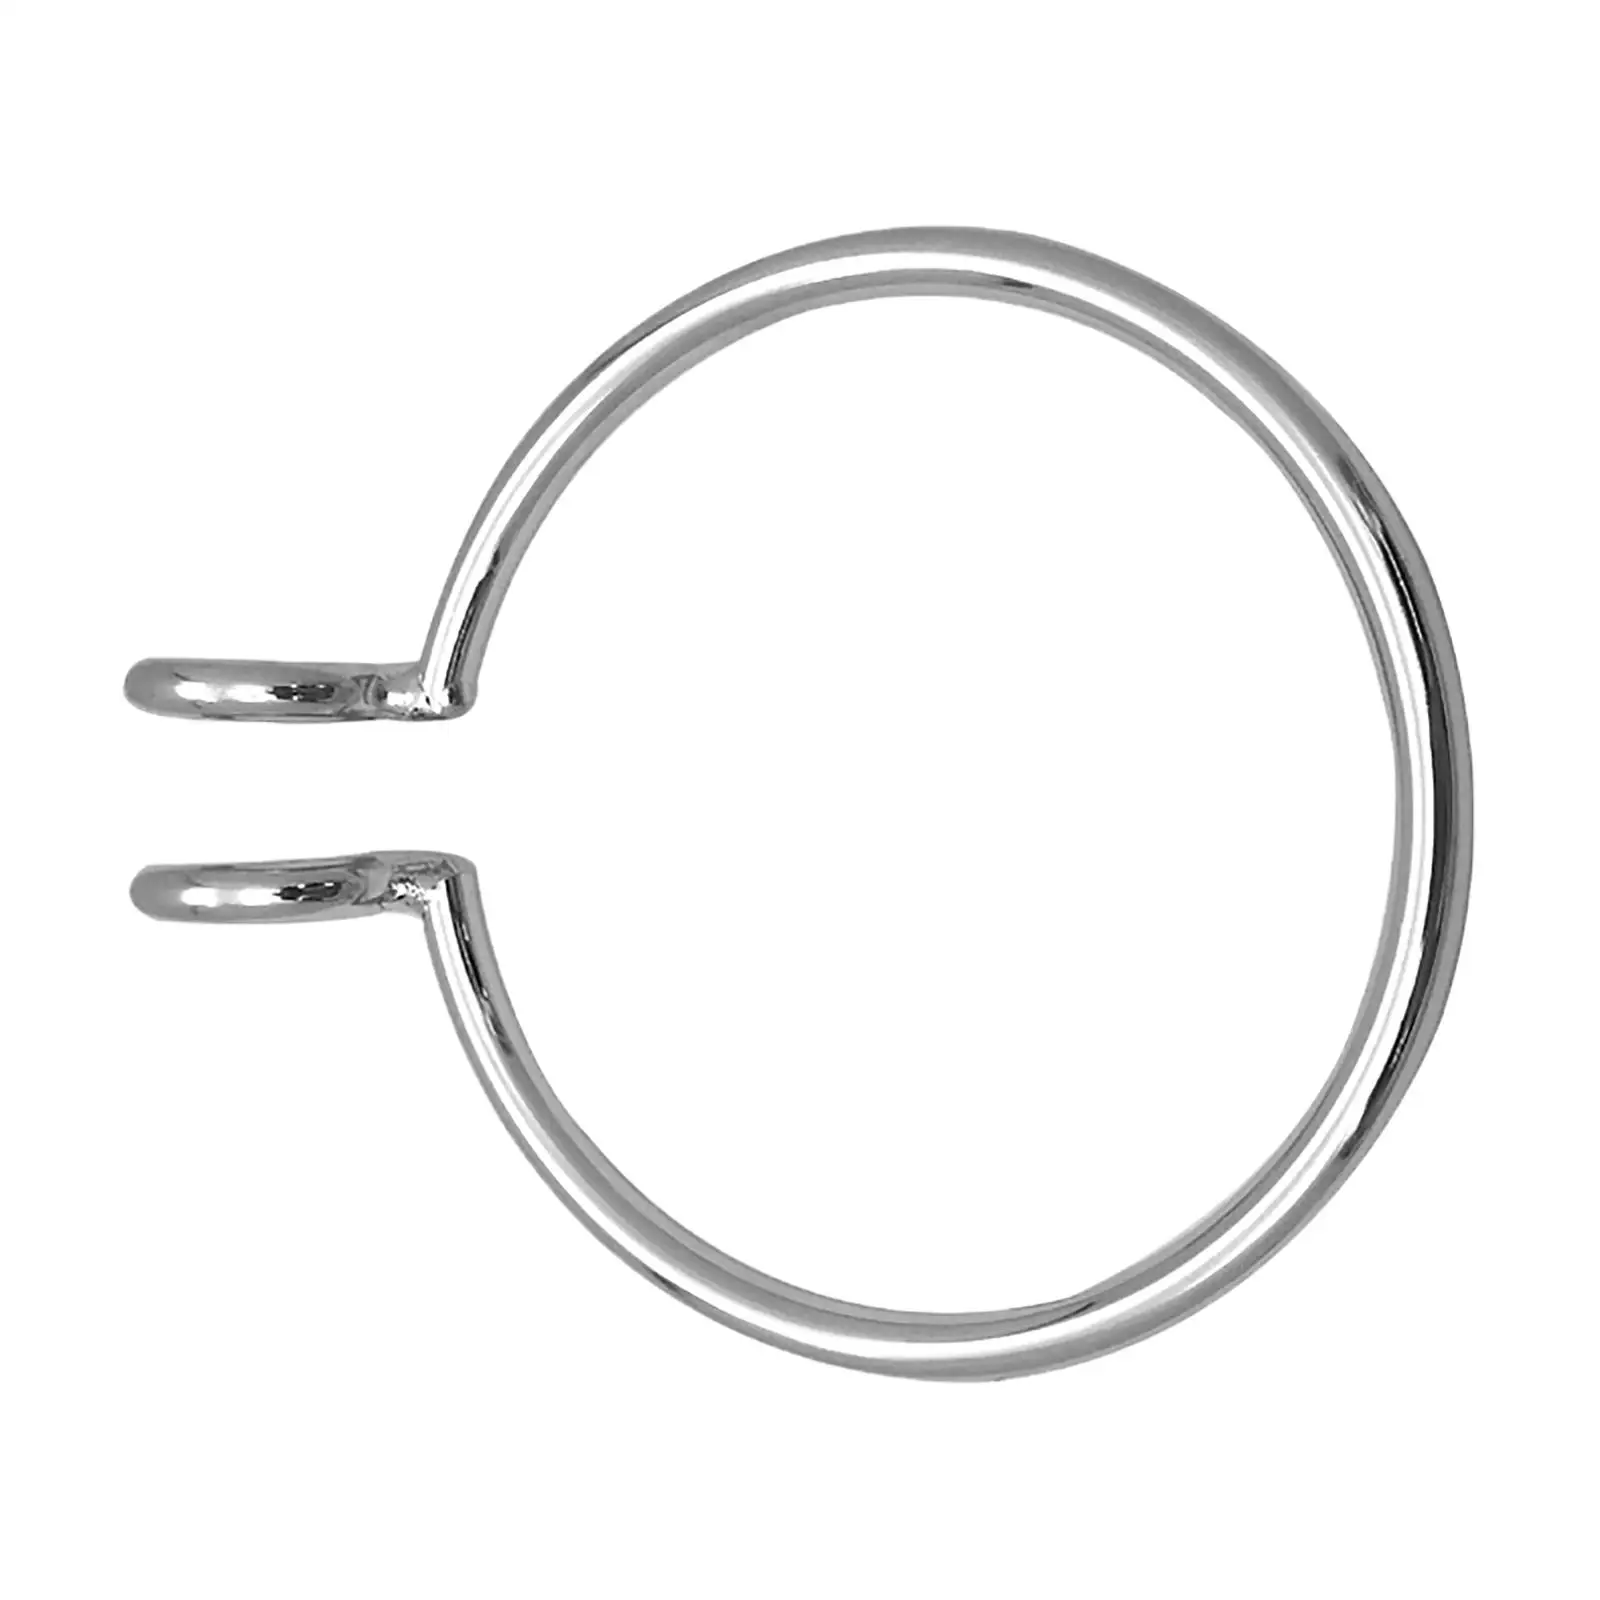 Anchor Retrieval System Ring with 8mm Wire Marine Grade , Suitable for Most Ships and Yachts Outdoors High Performance Premium